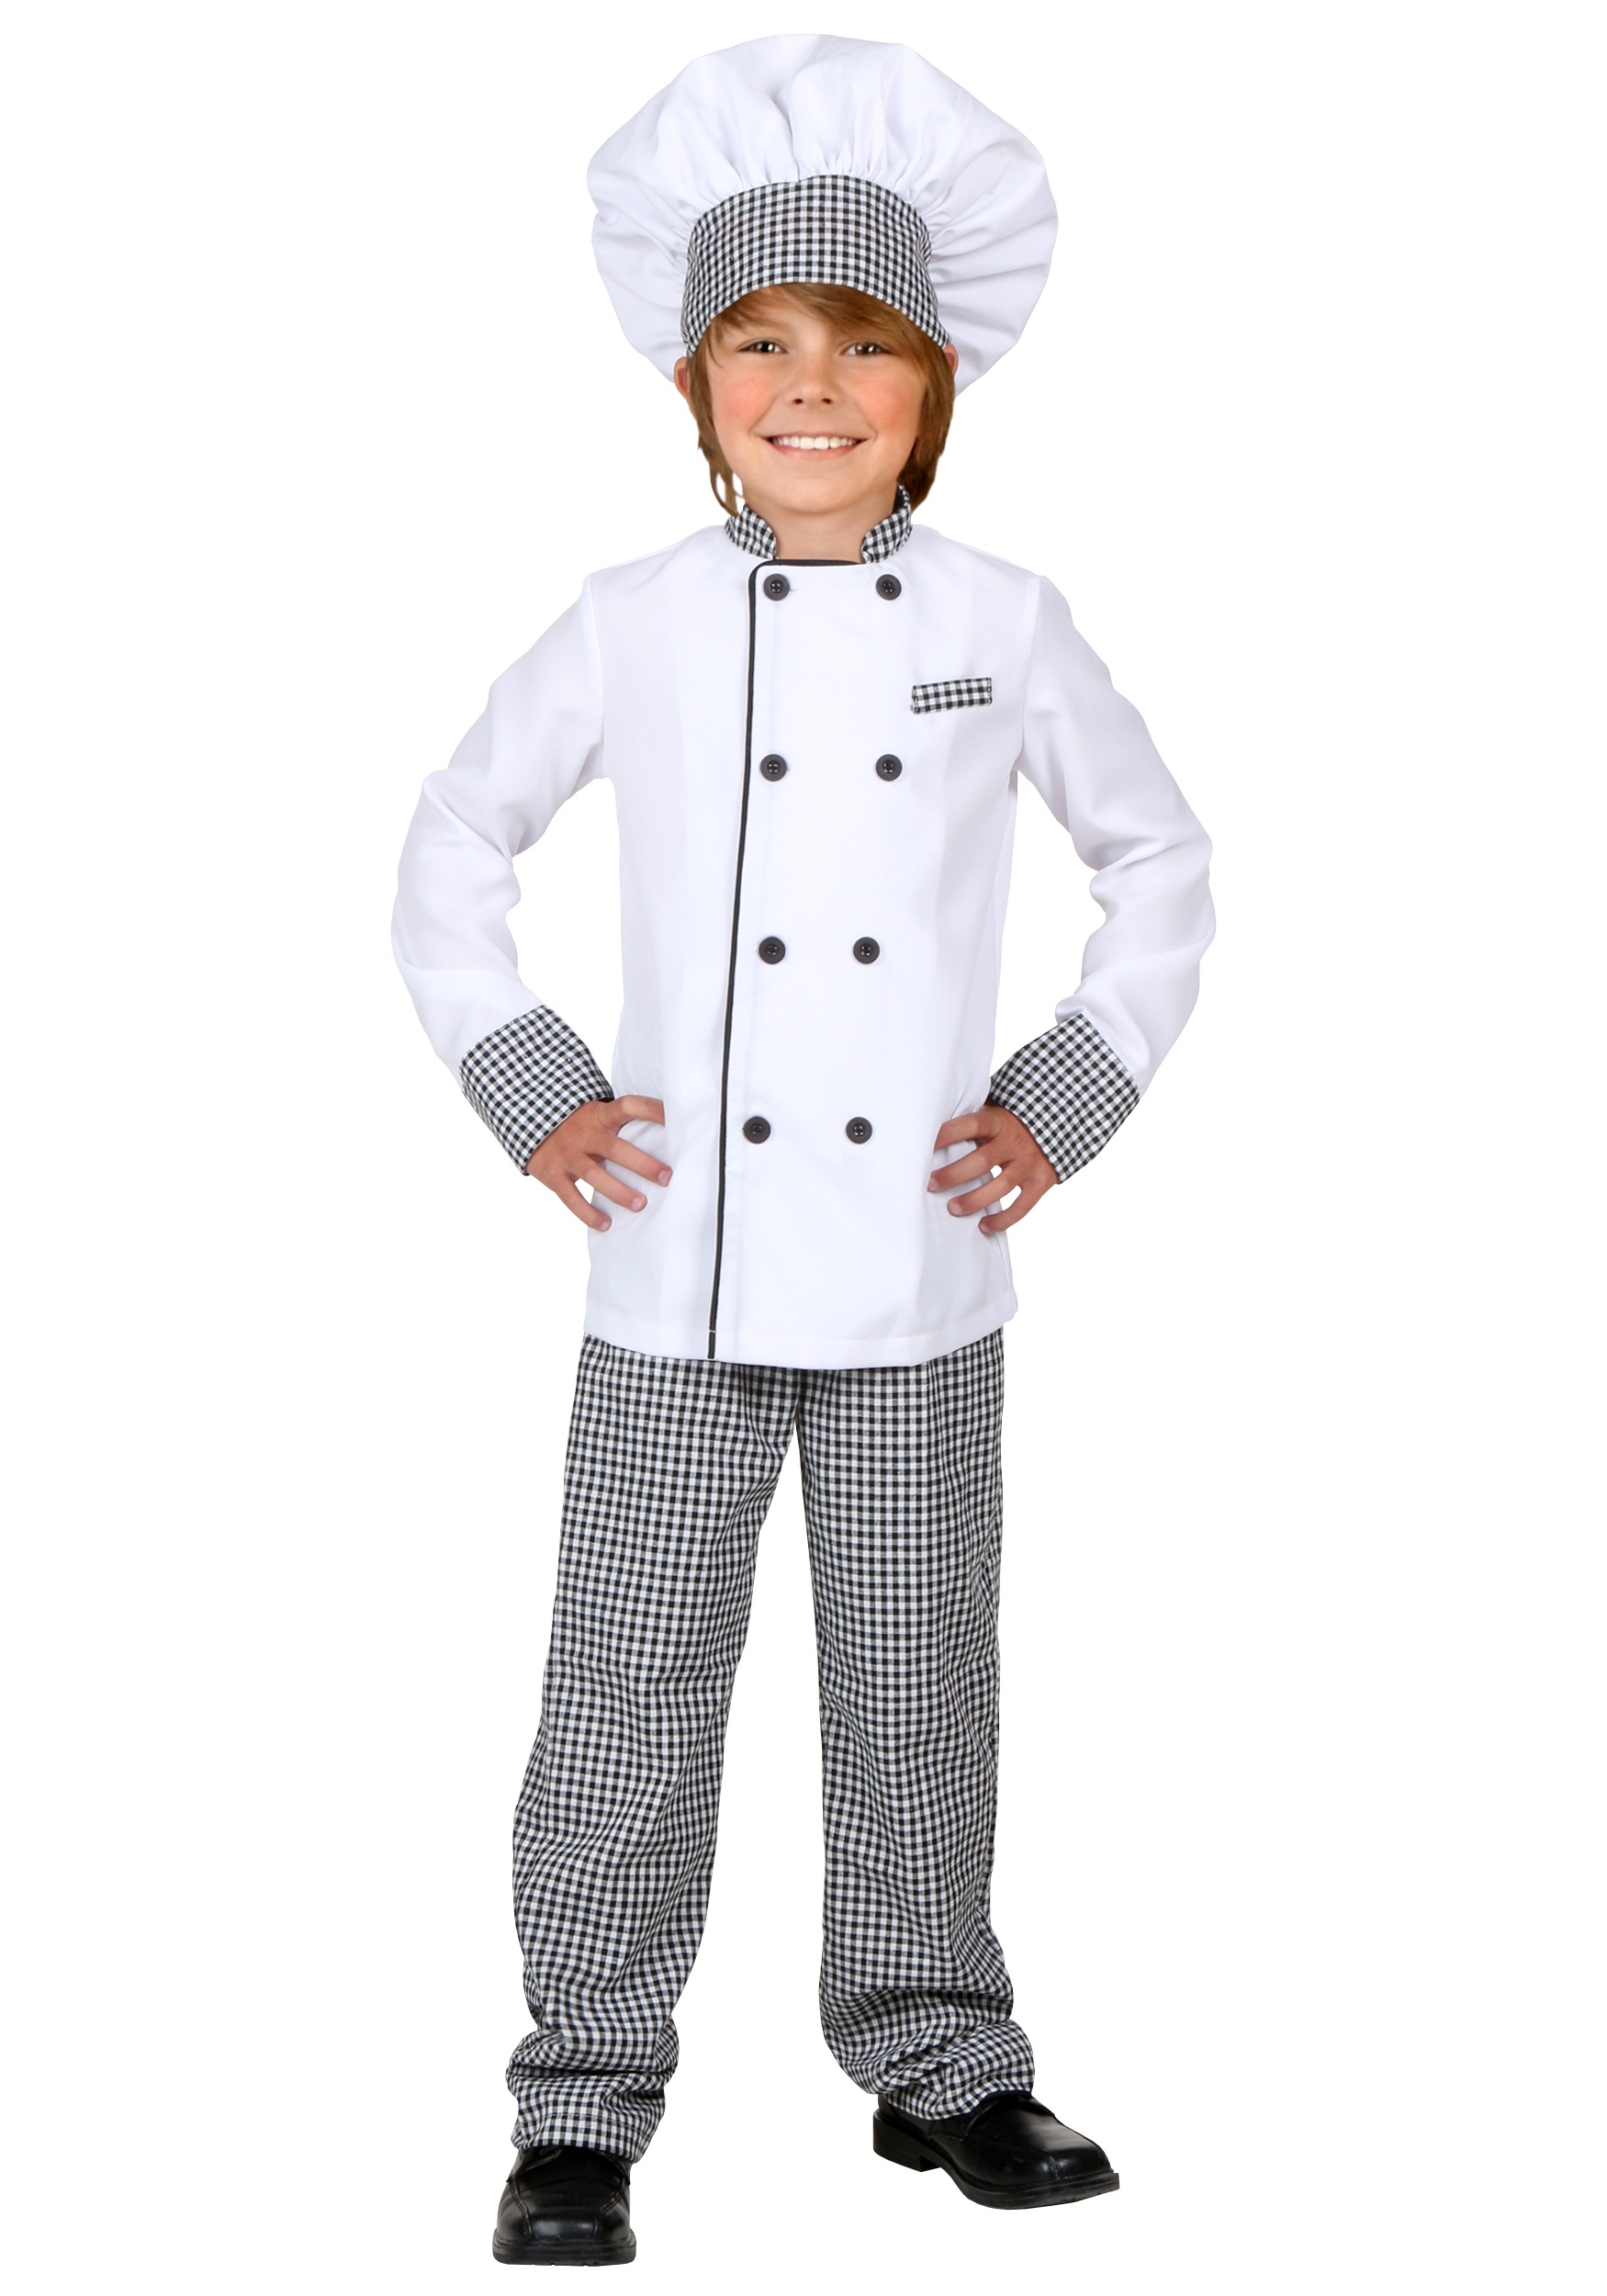 Photos - Fancy Dress FUN Costumes Chef Child Costume | Exclusive | Made By Us Costume Black/